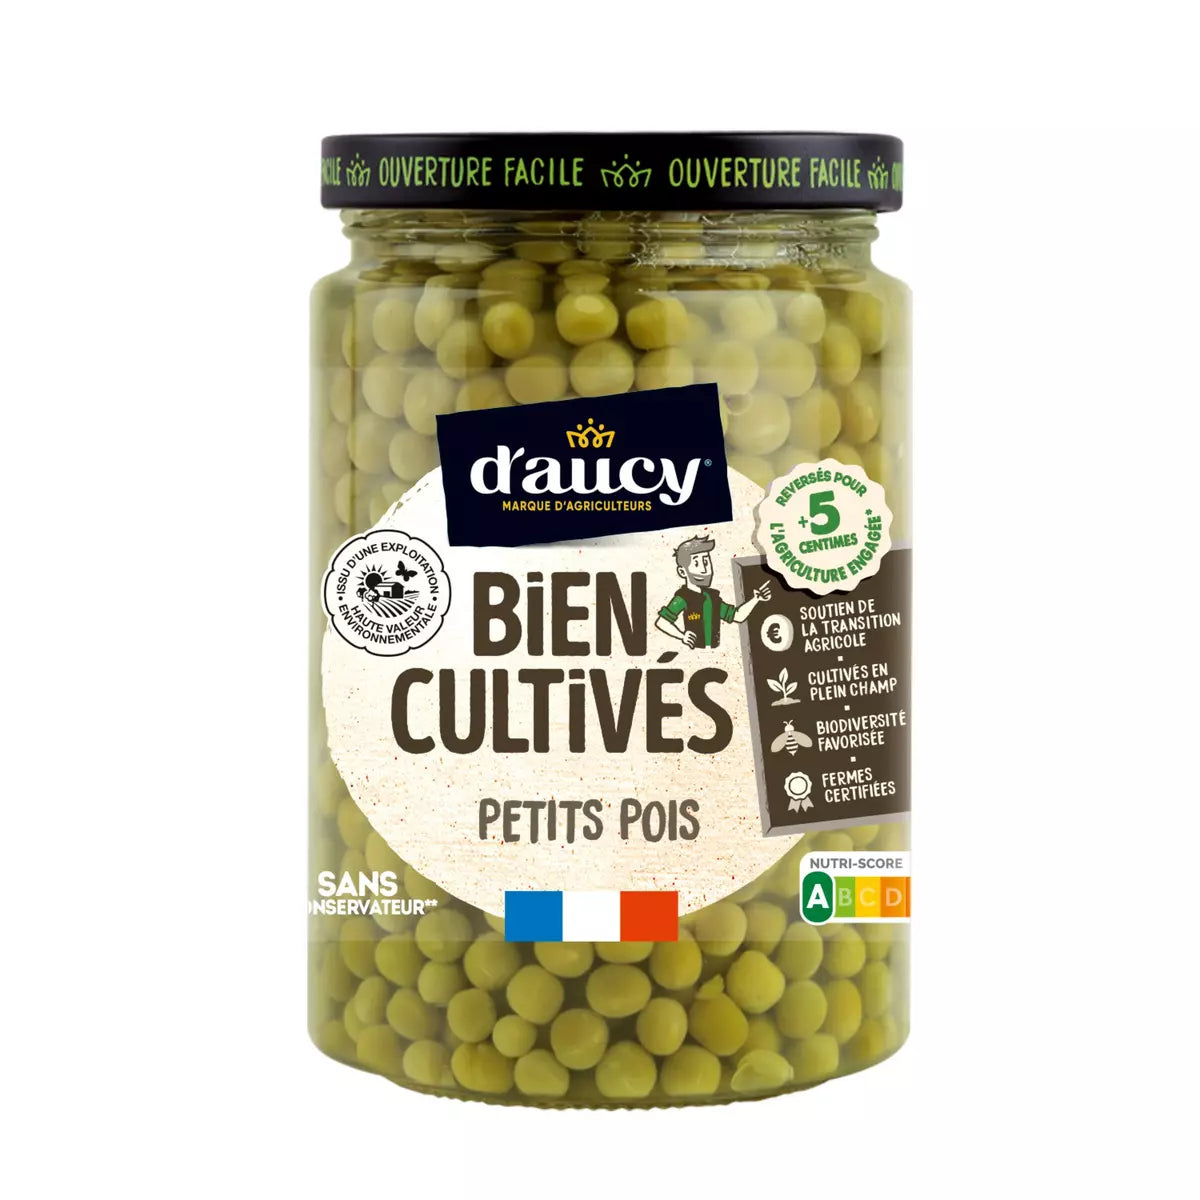 Daucy Petits Pois well cultivated 425g -i103